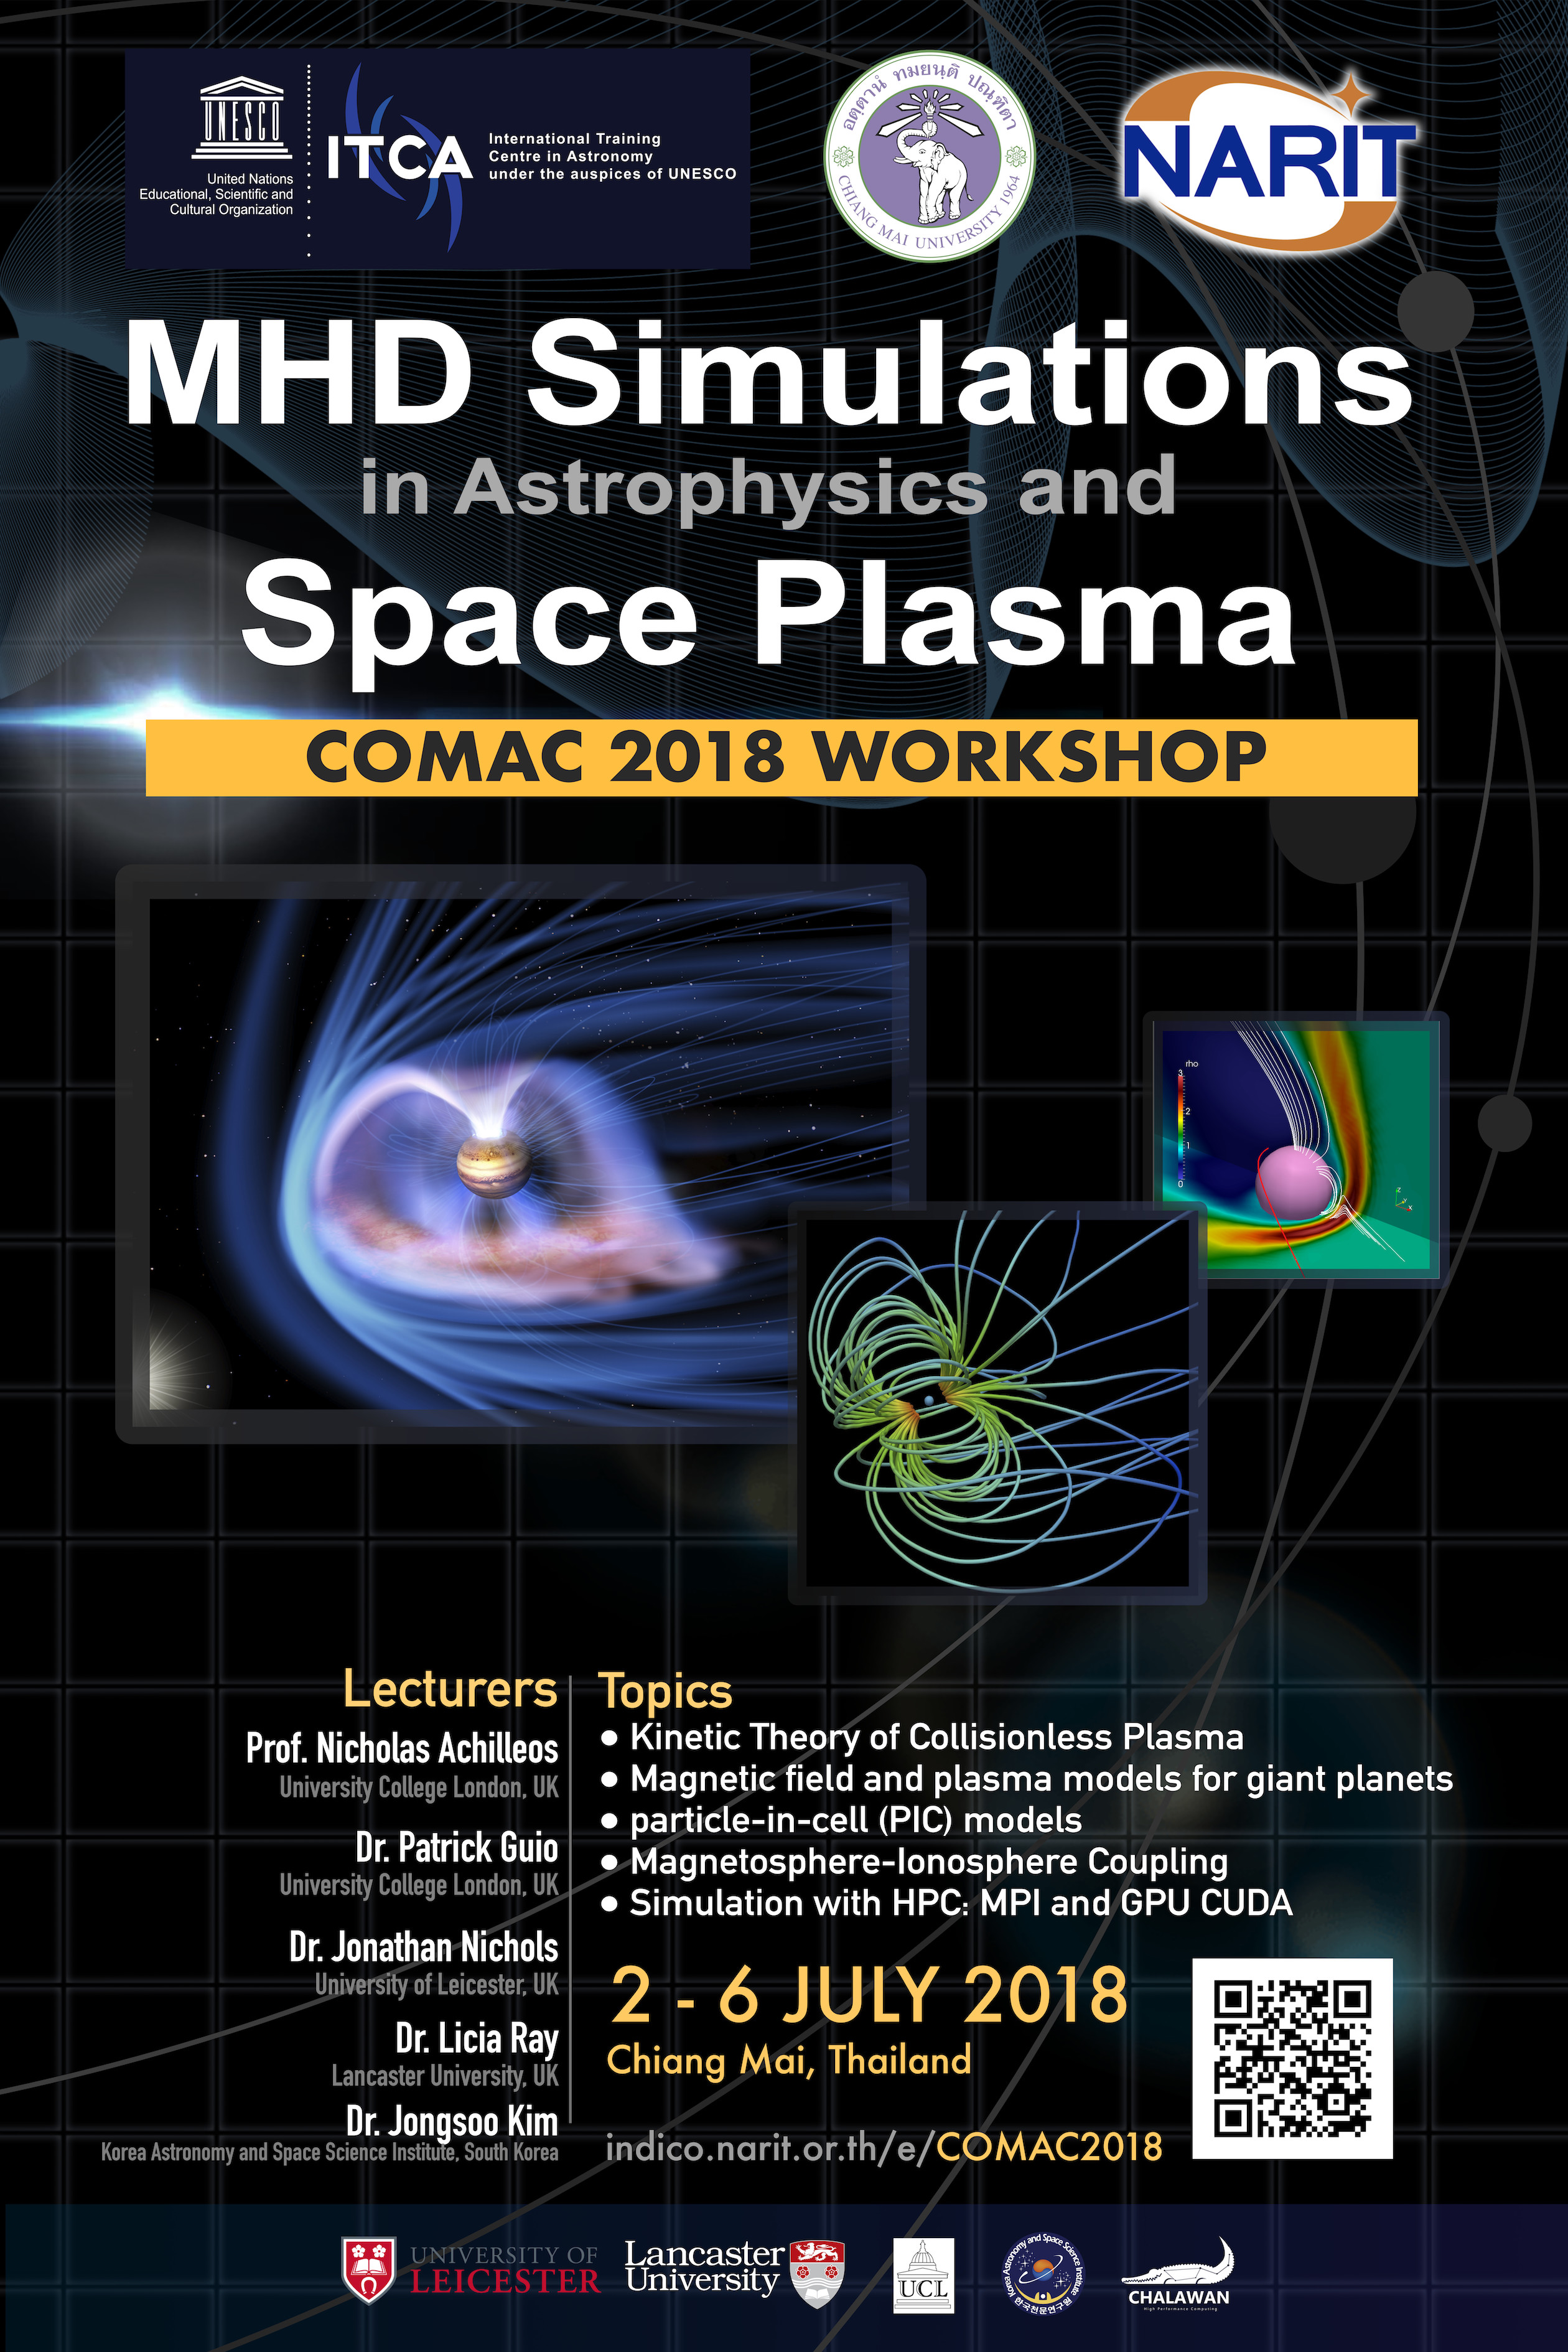 COMAC 2018: MHD Simulations in Astrophysics and Space Plasma